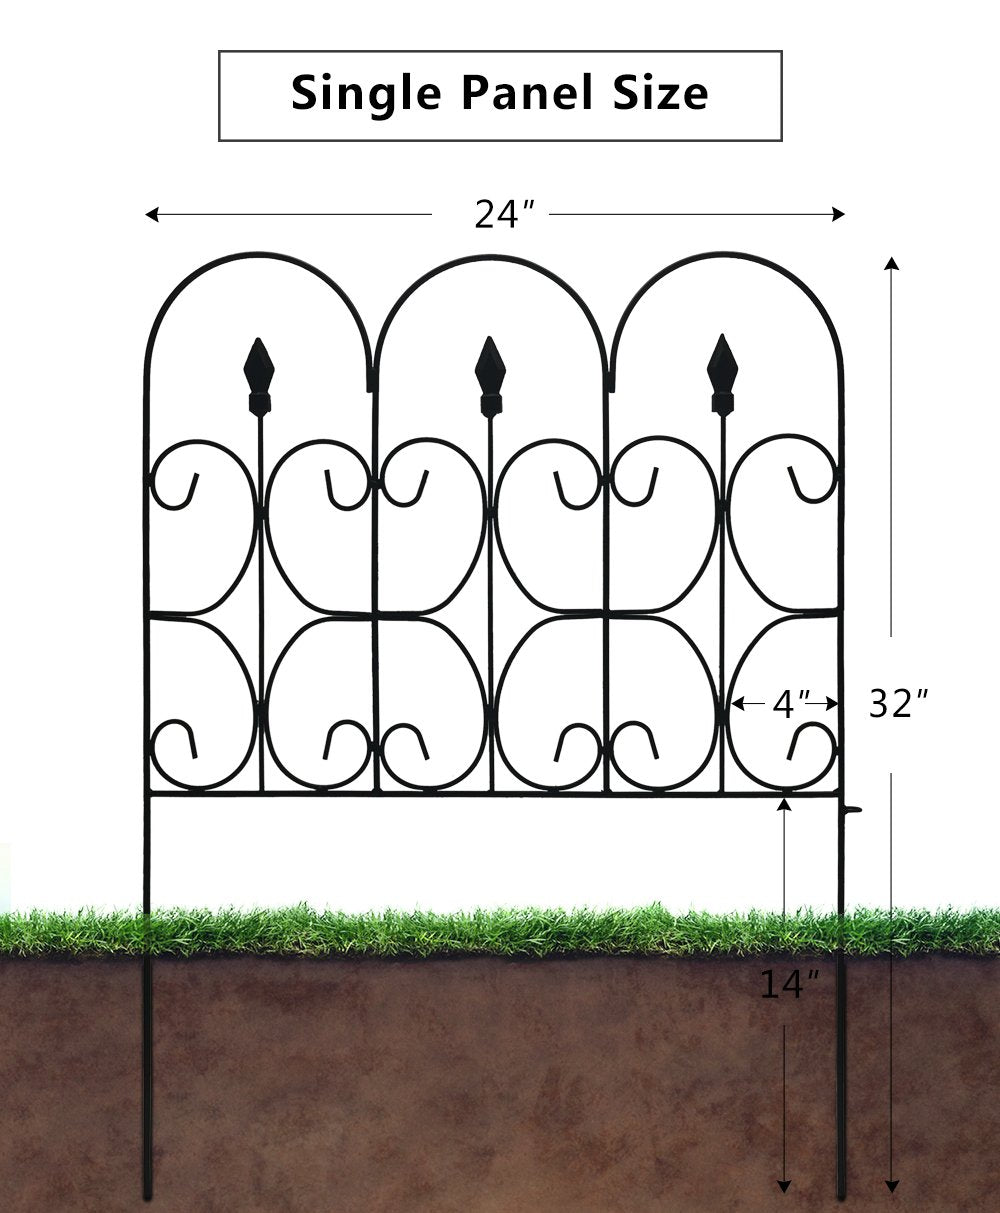 AMAGABELI GARDEN & HOME 5 Panels Decorative Garden Fence Animal Barrier for  Dog 32in(H) x 10ft(L) in Total Outdoor Black Metal Wire Garden Fencing